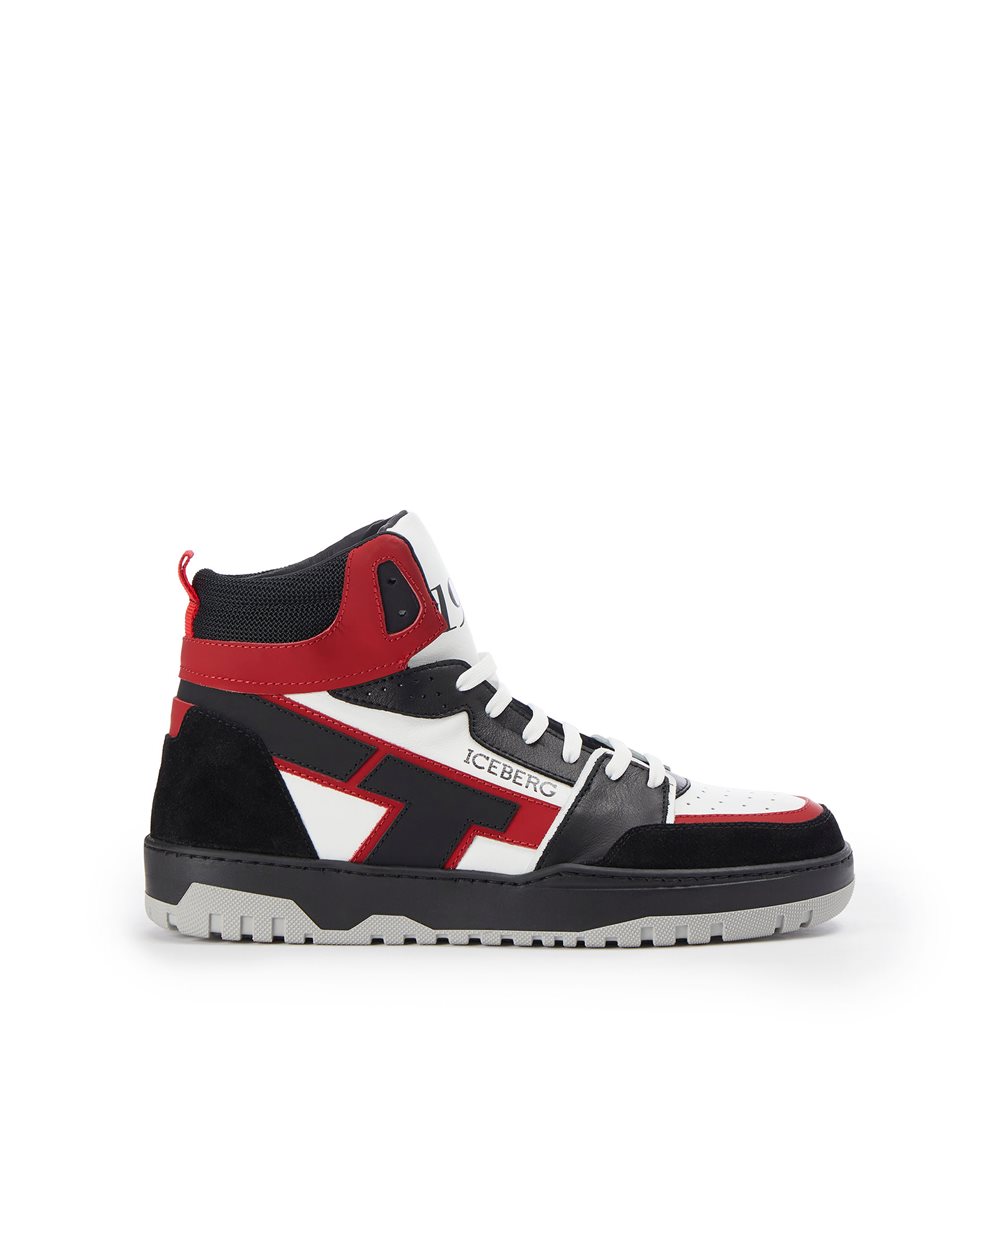 Okoro high-top sneakers - ( PRIMO STEP IT ) PROMO SALDI UP TO 30% | Iceberg - Official Website